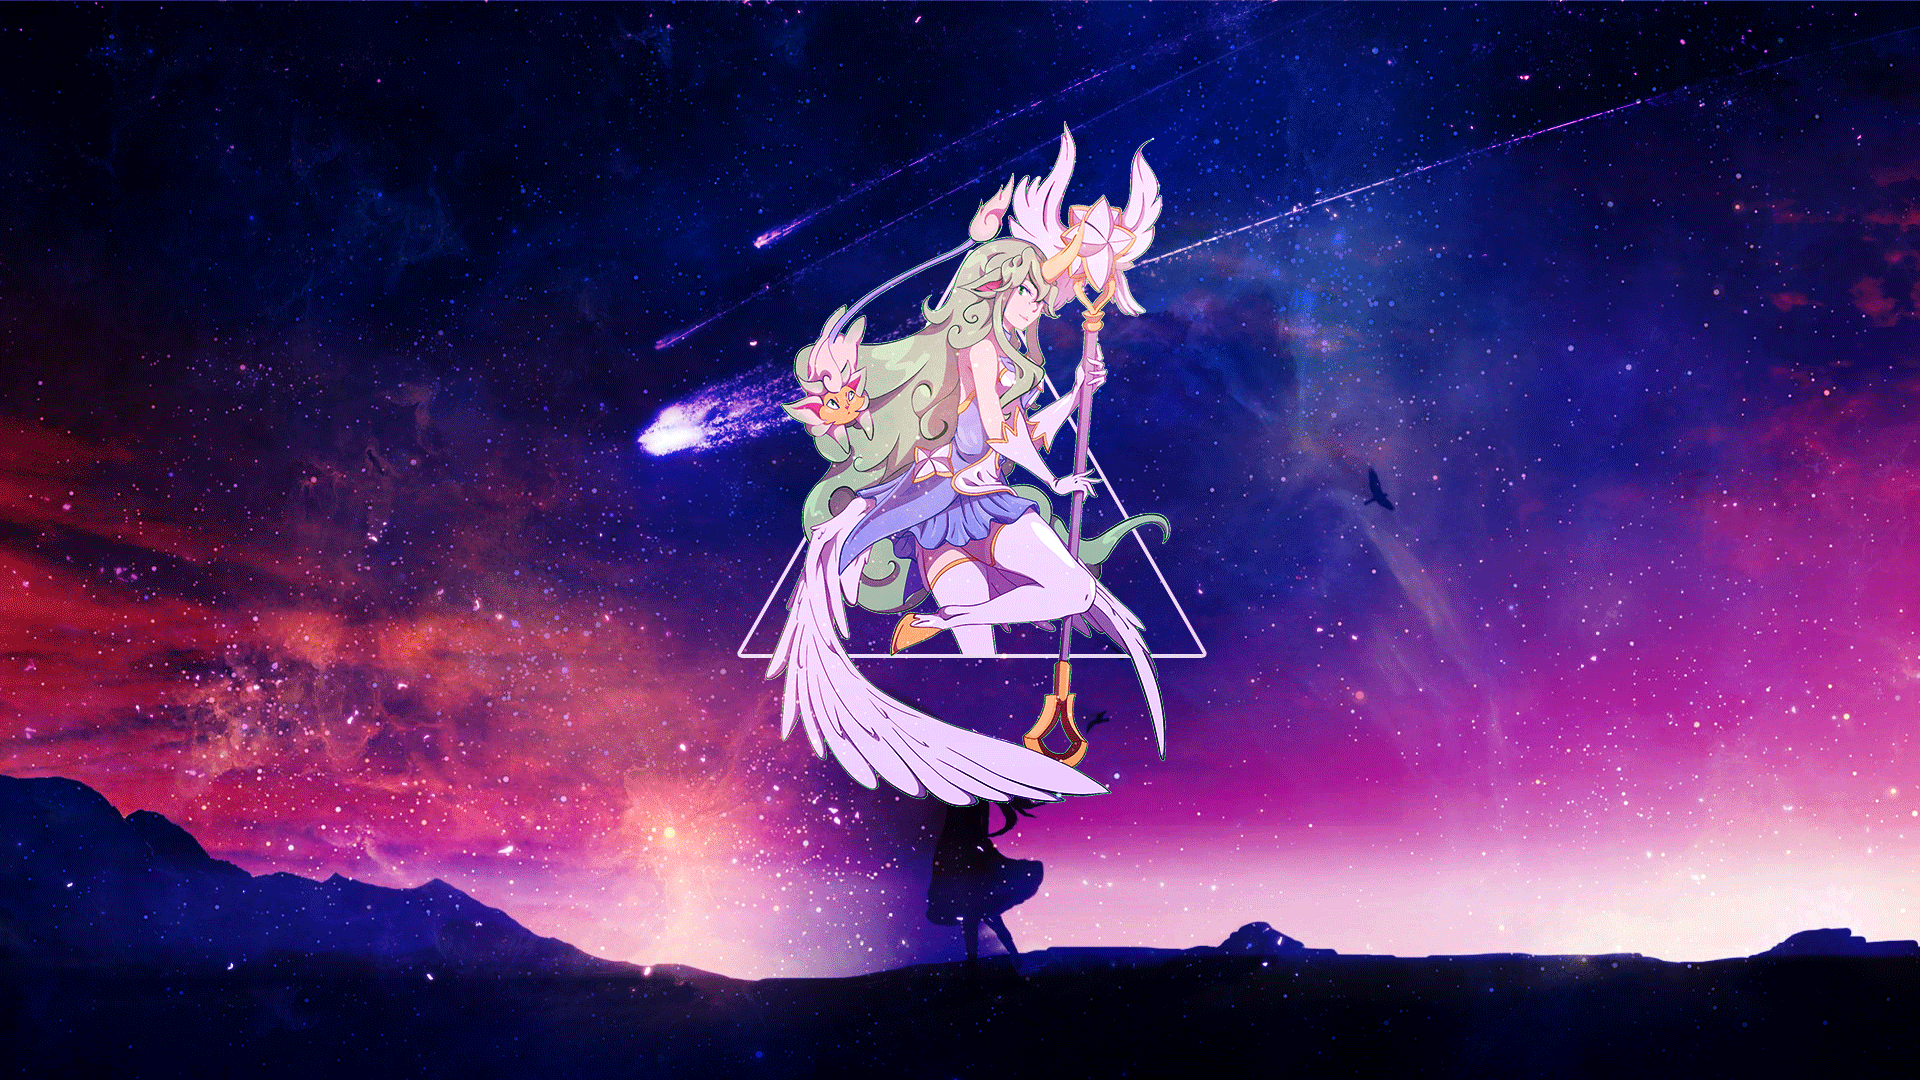 General 1920x1080 League of Legends Soraka (League of Legends) video game art PC gaming photoshopped picture-in-picture